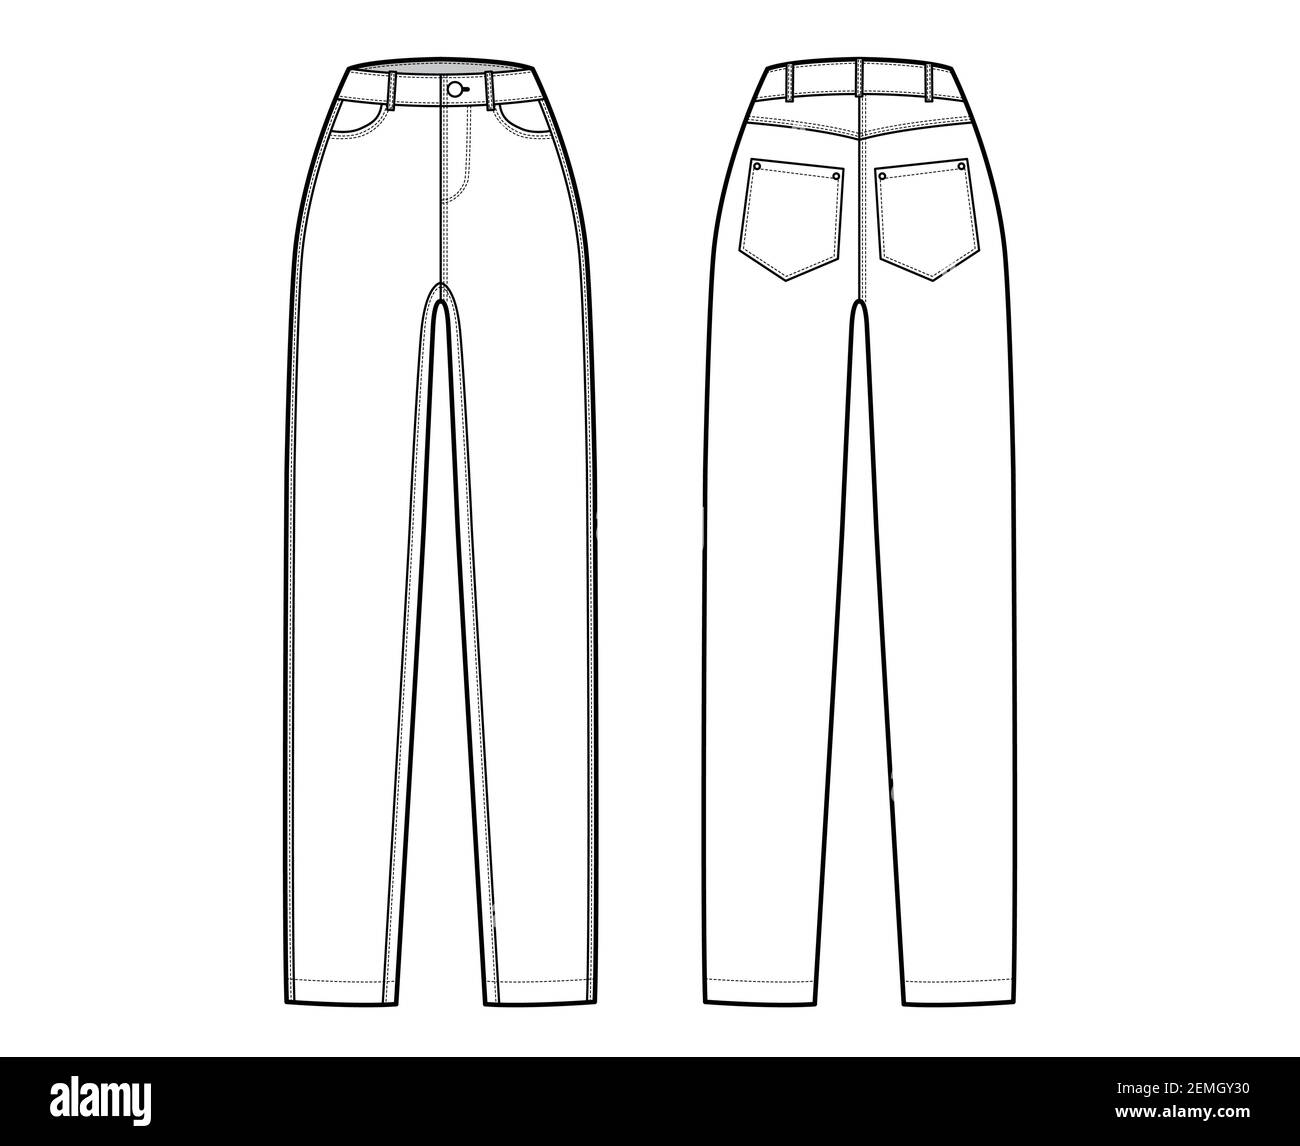 Skinny Jeans Denim pants technical fashion illustration with full length,  normal waist, high rise, coin, angled